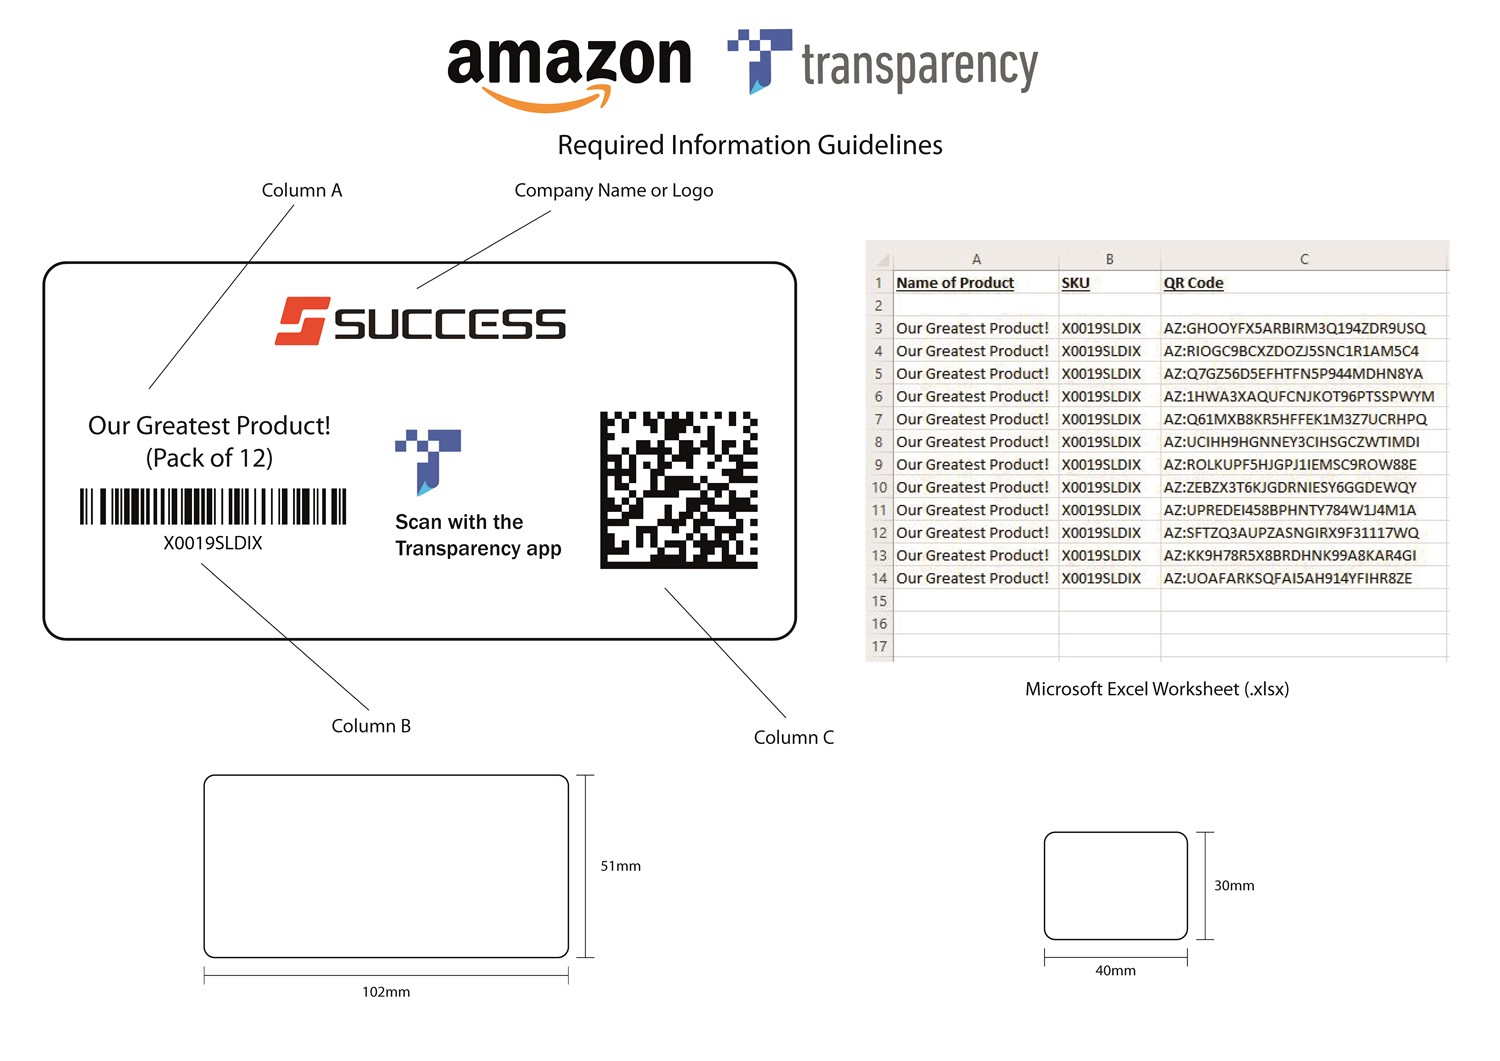 Amazon Transparency Guidelines